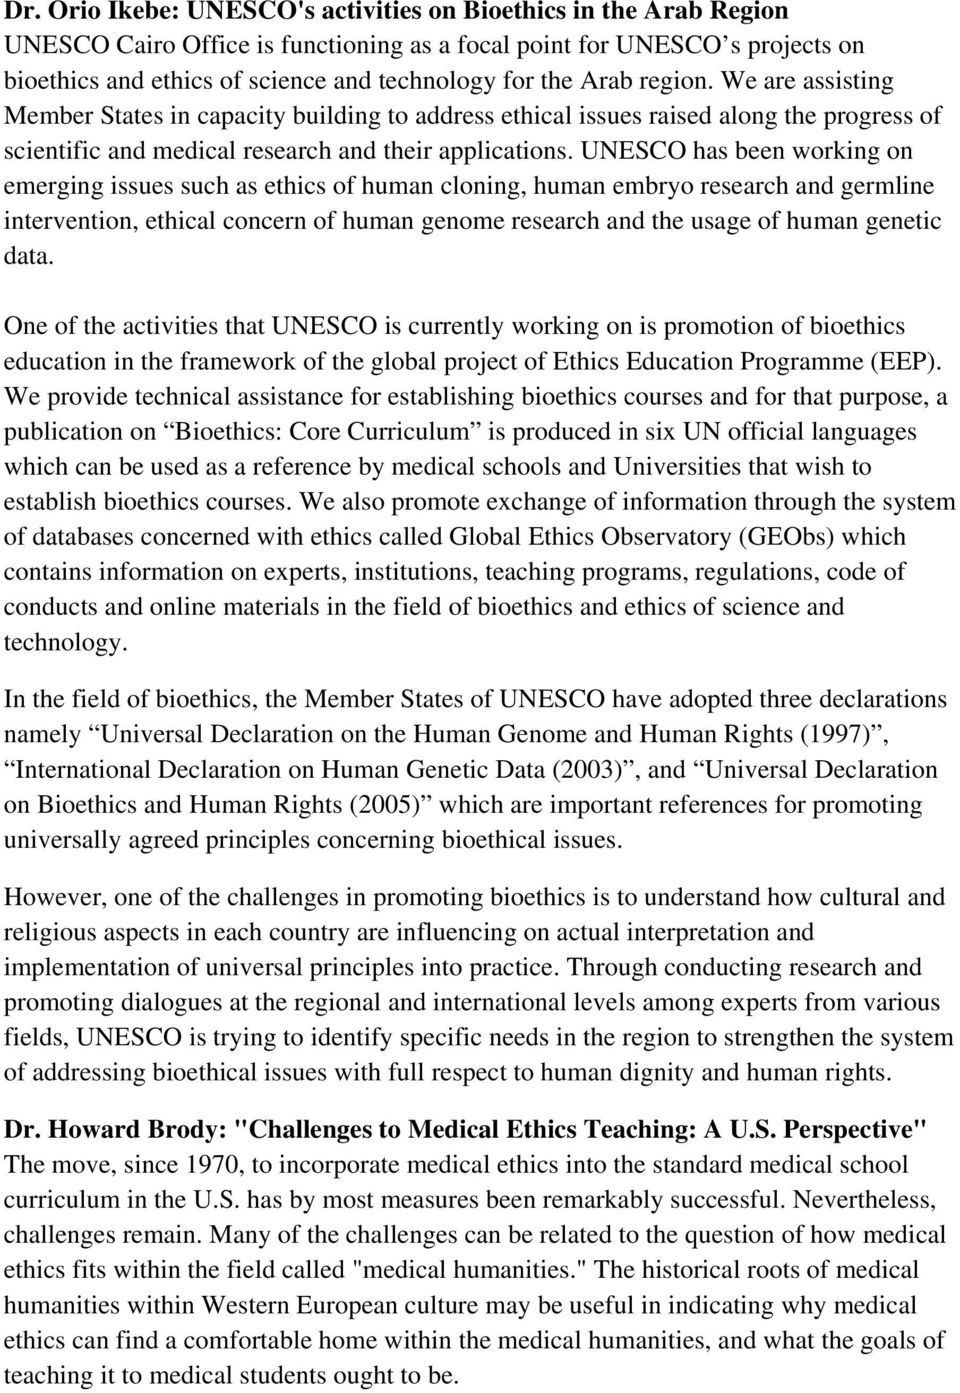 UNESCO has been working on emerging issues such as ethics of human cloning, human embryo research and germline intervention, ethical concern of human genome research and the usage of human genetic